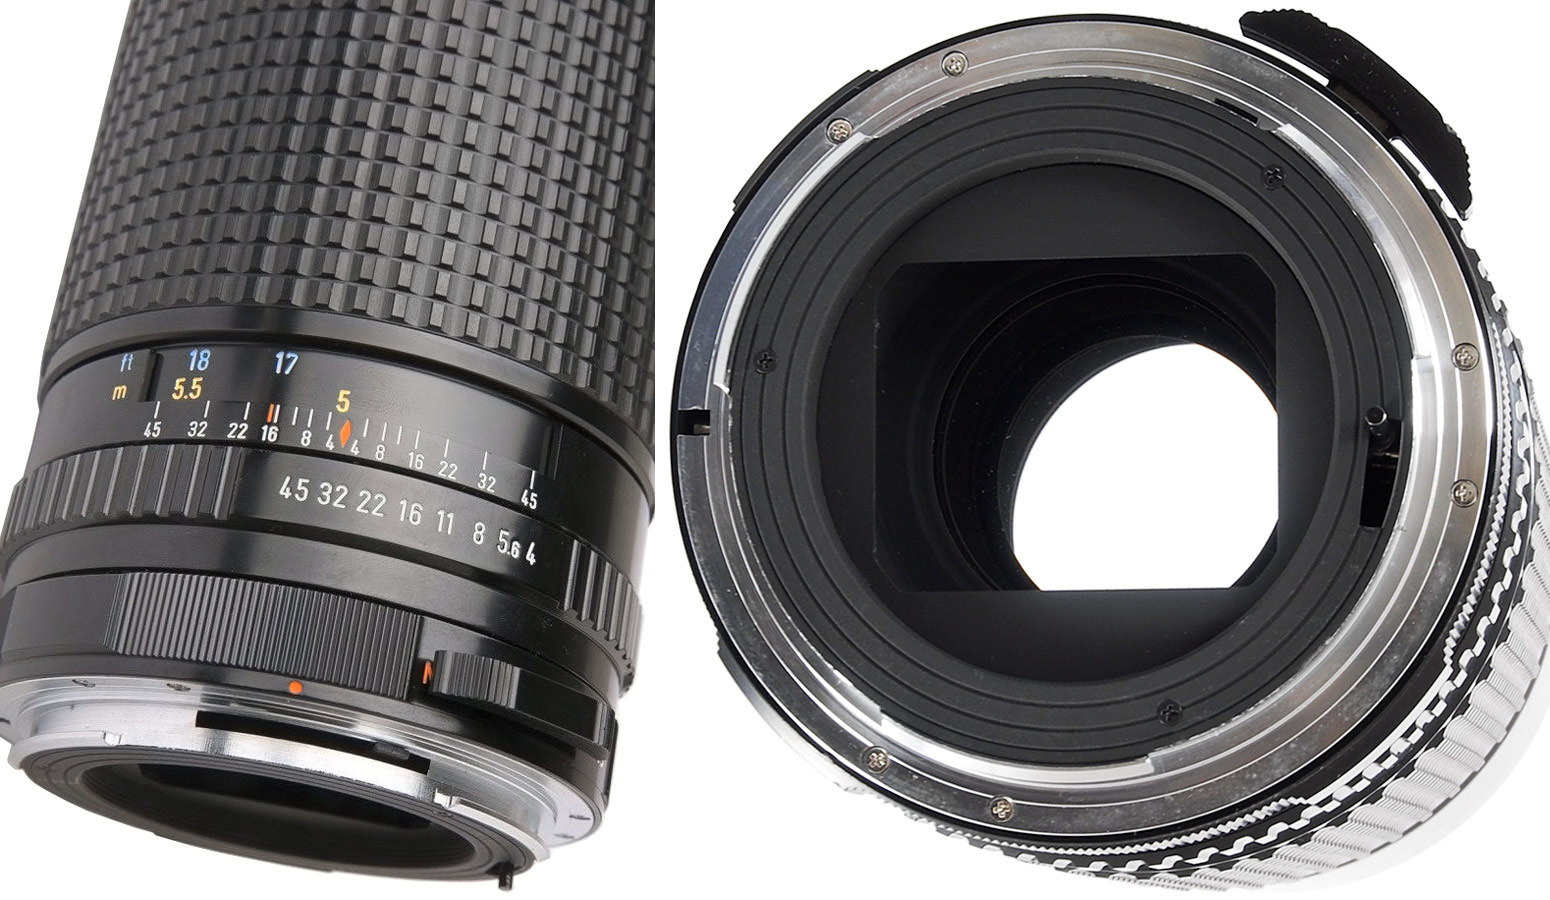 Pentax 67 300mm F4: Lens review, Details, Experience, Sample images